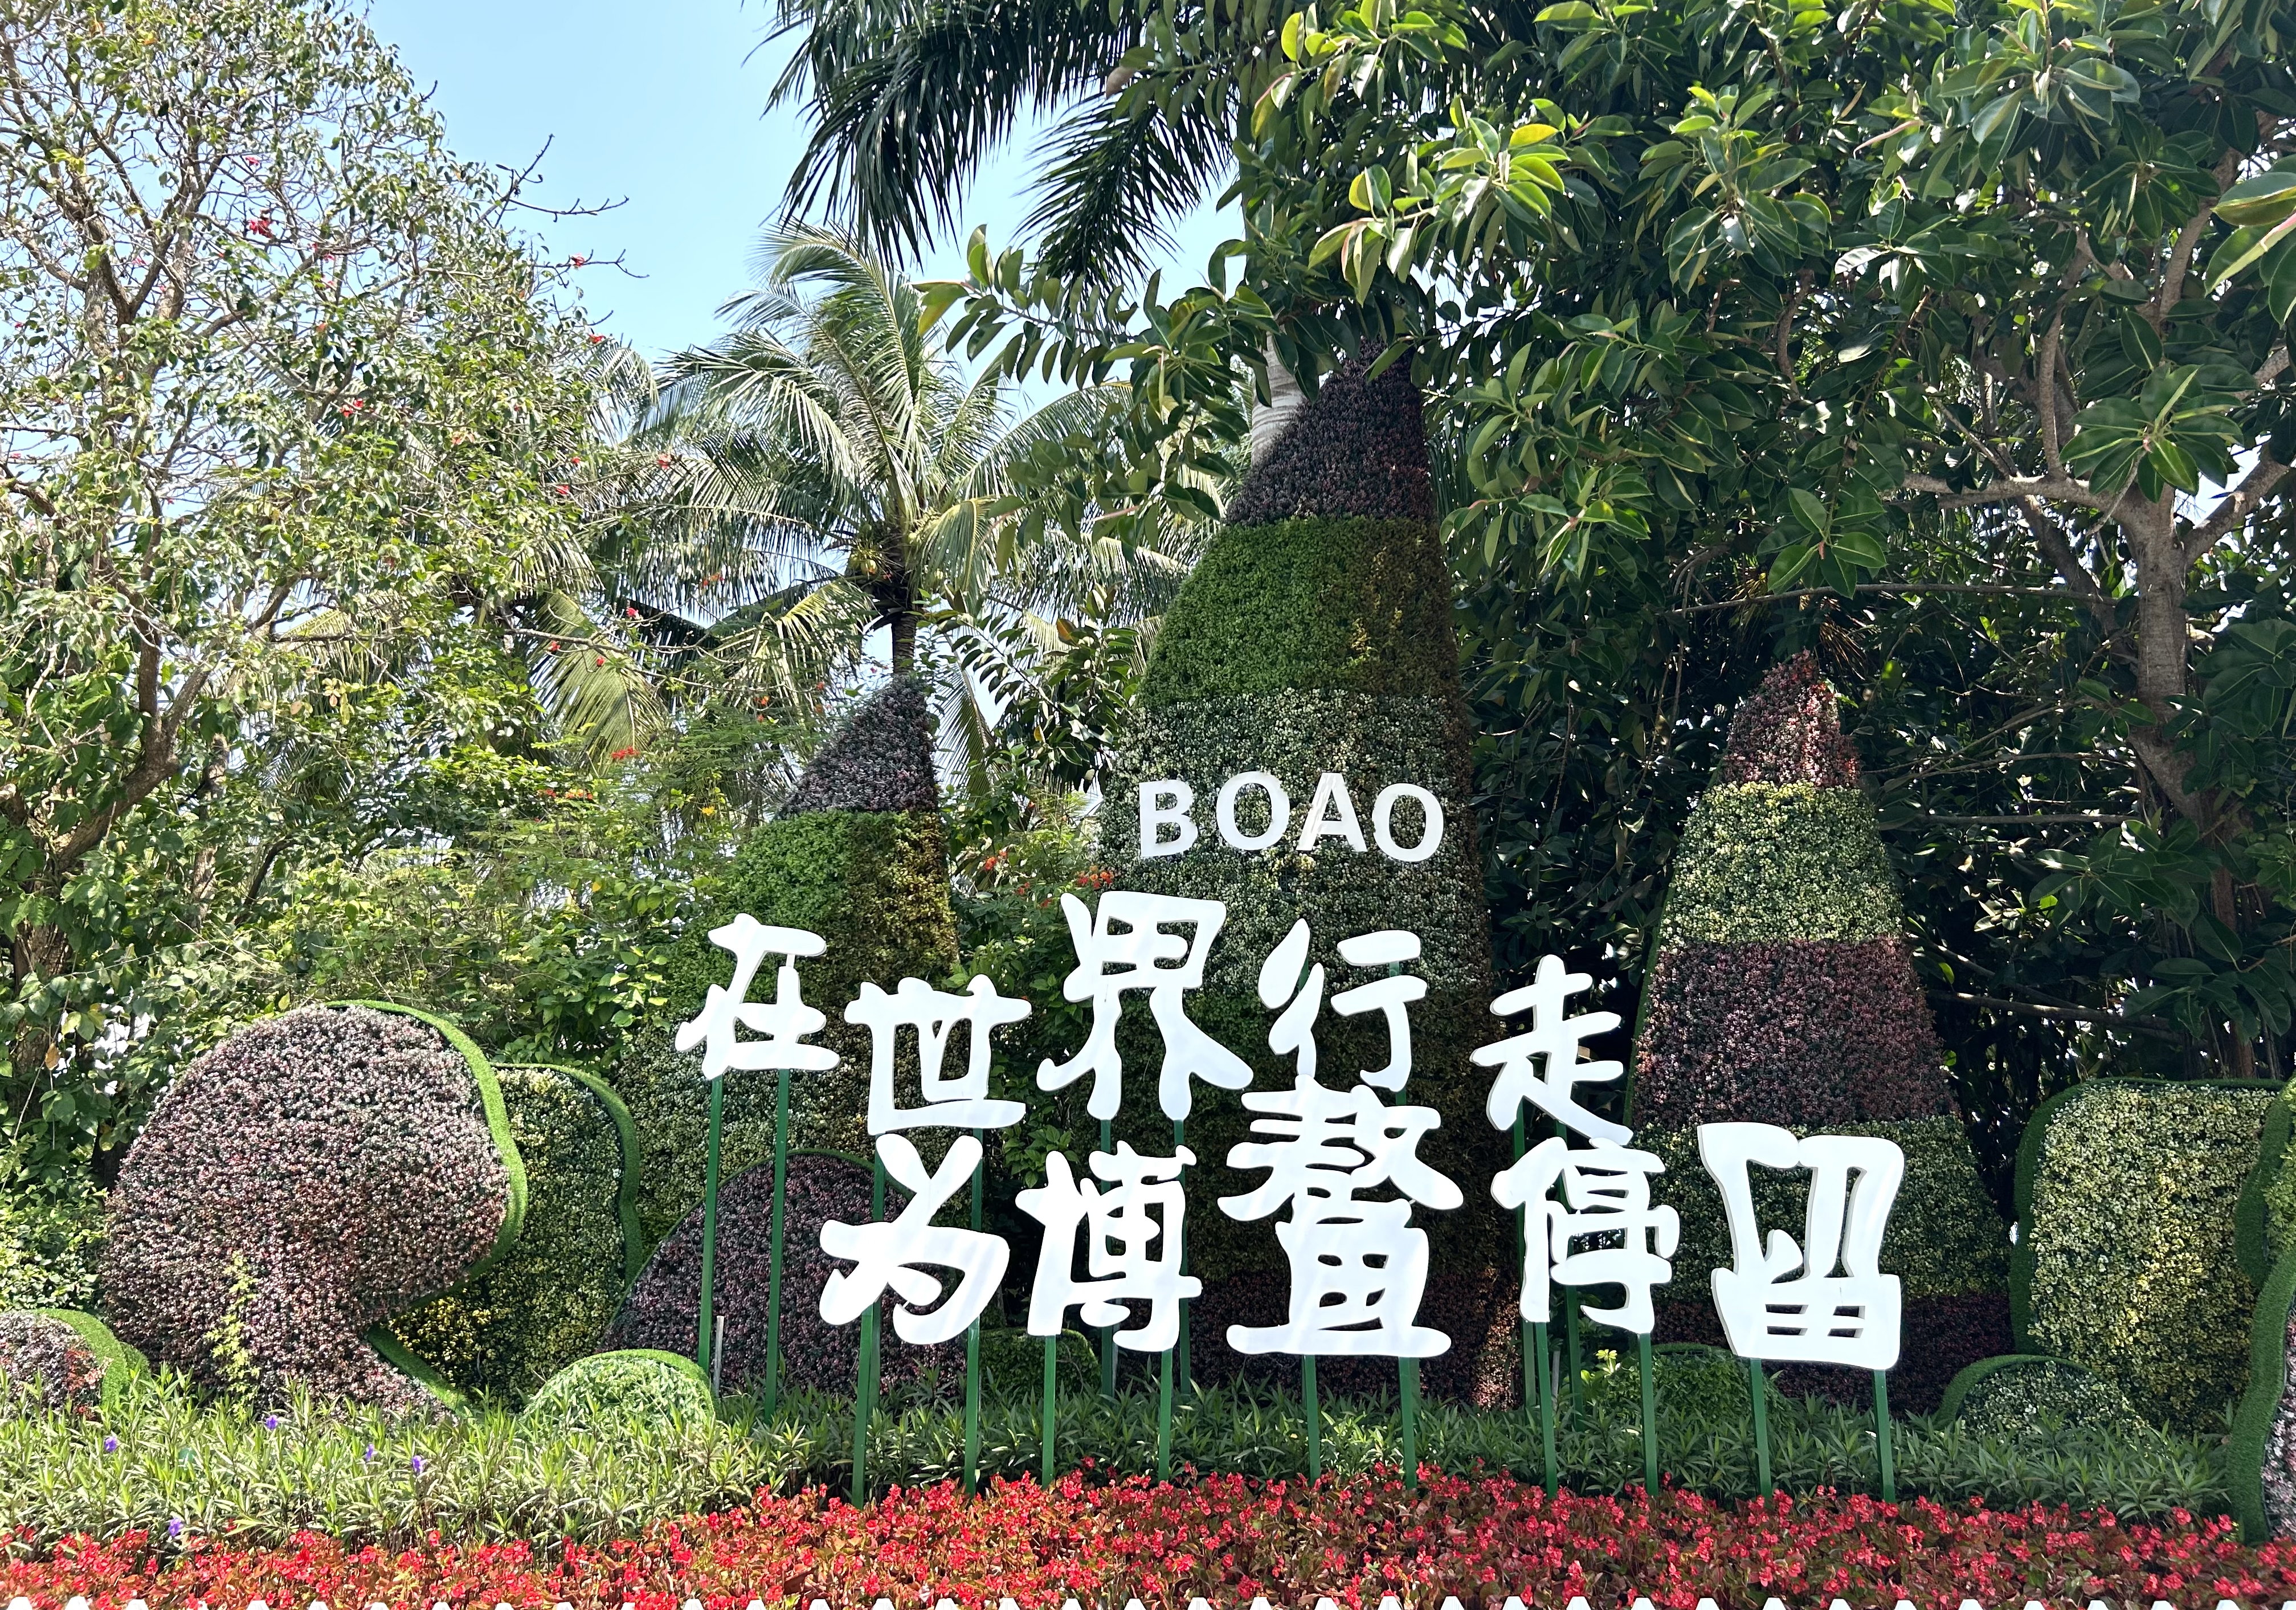 2024 Boao Forum for Asia: Hainan's scenery through the lens of CGTN